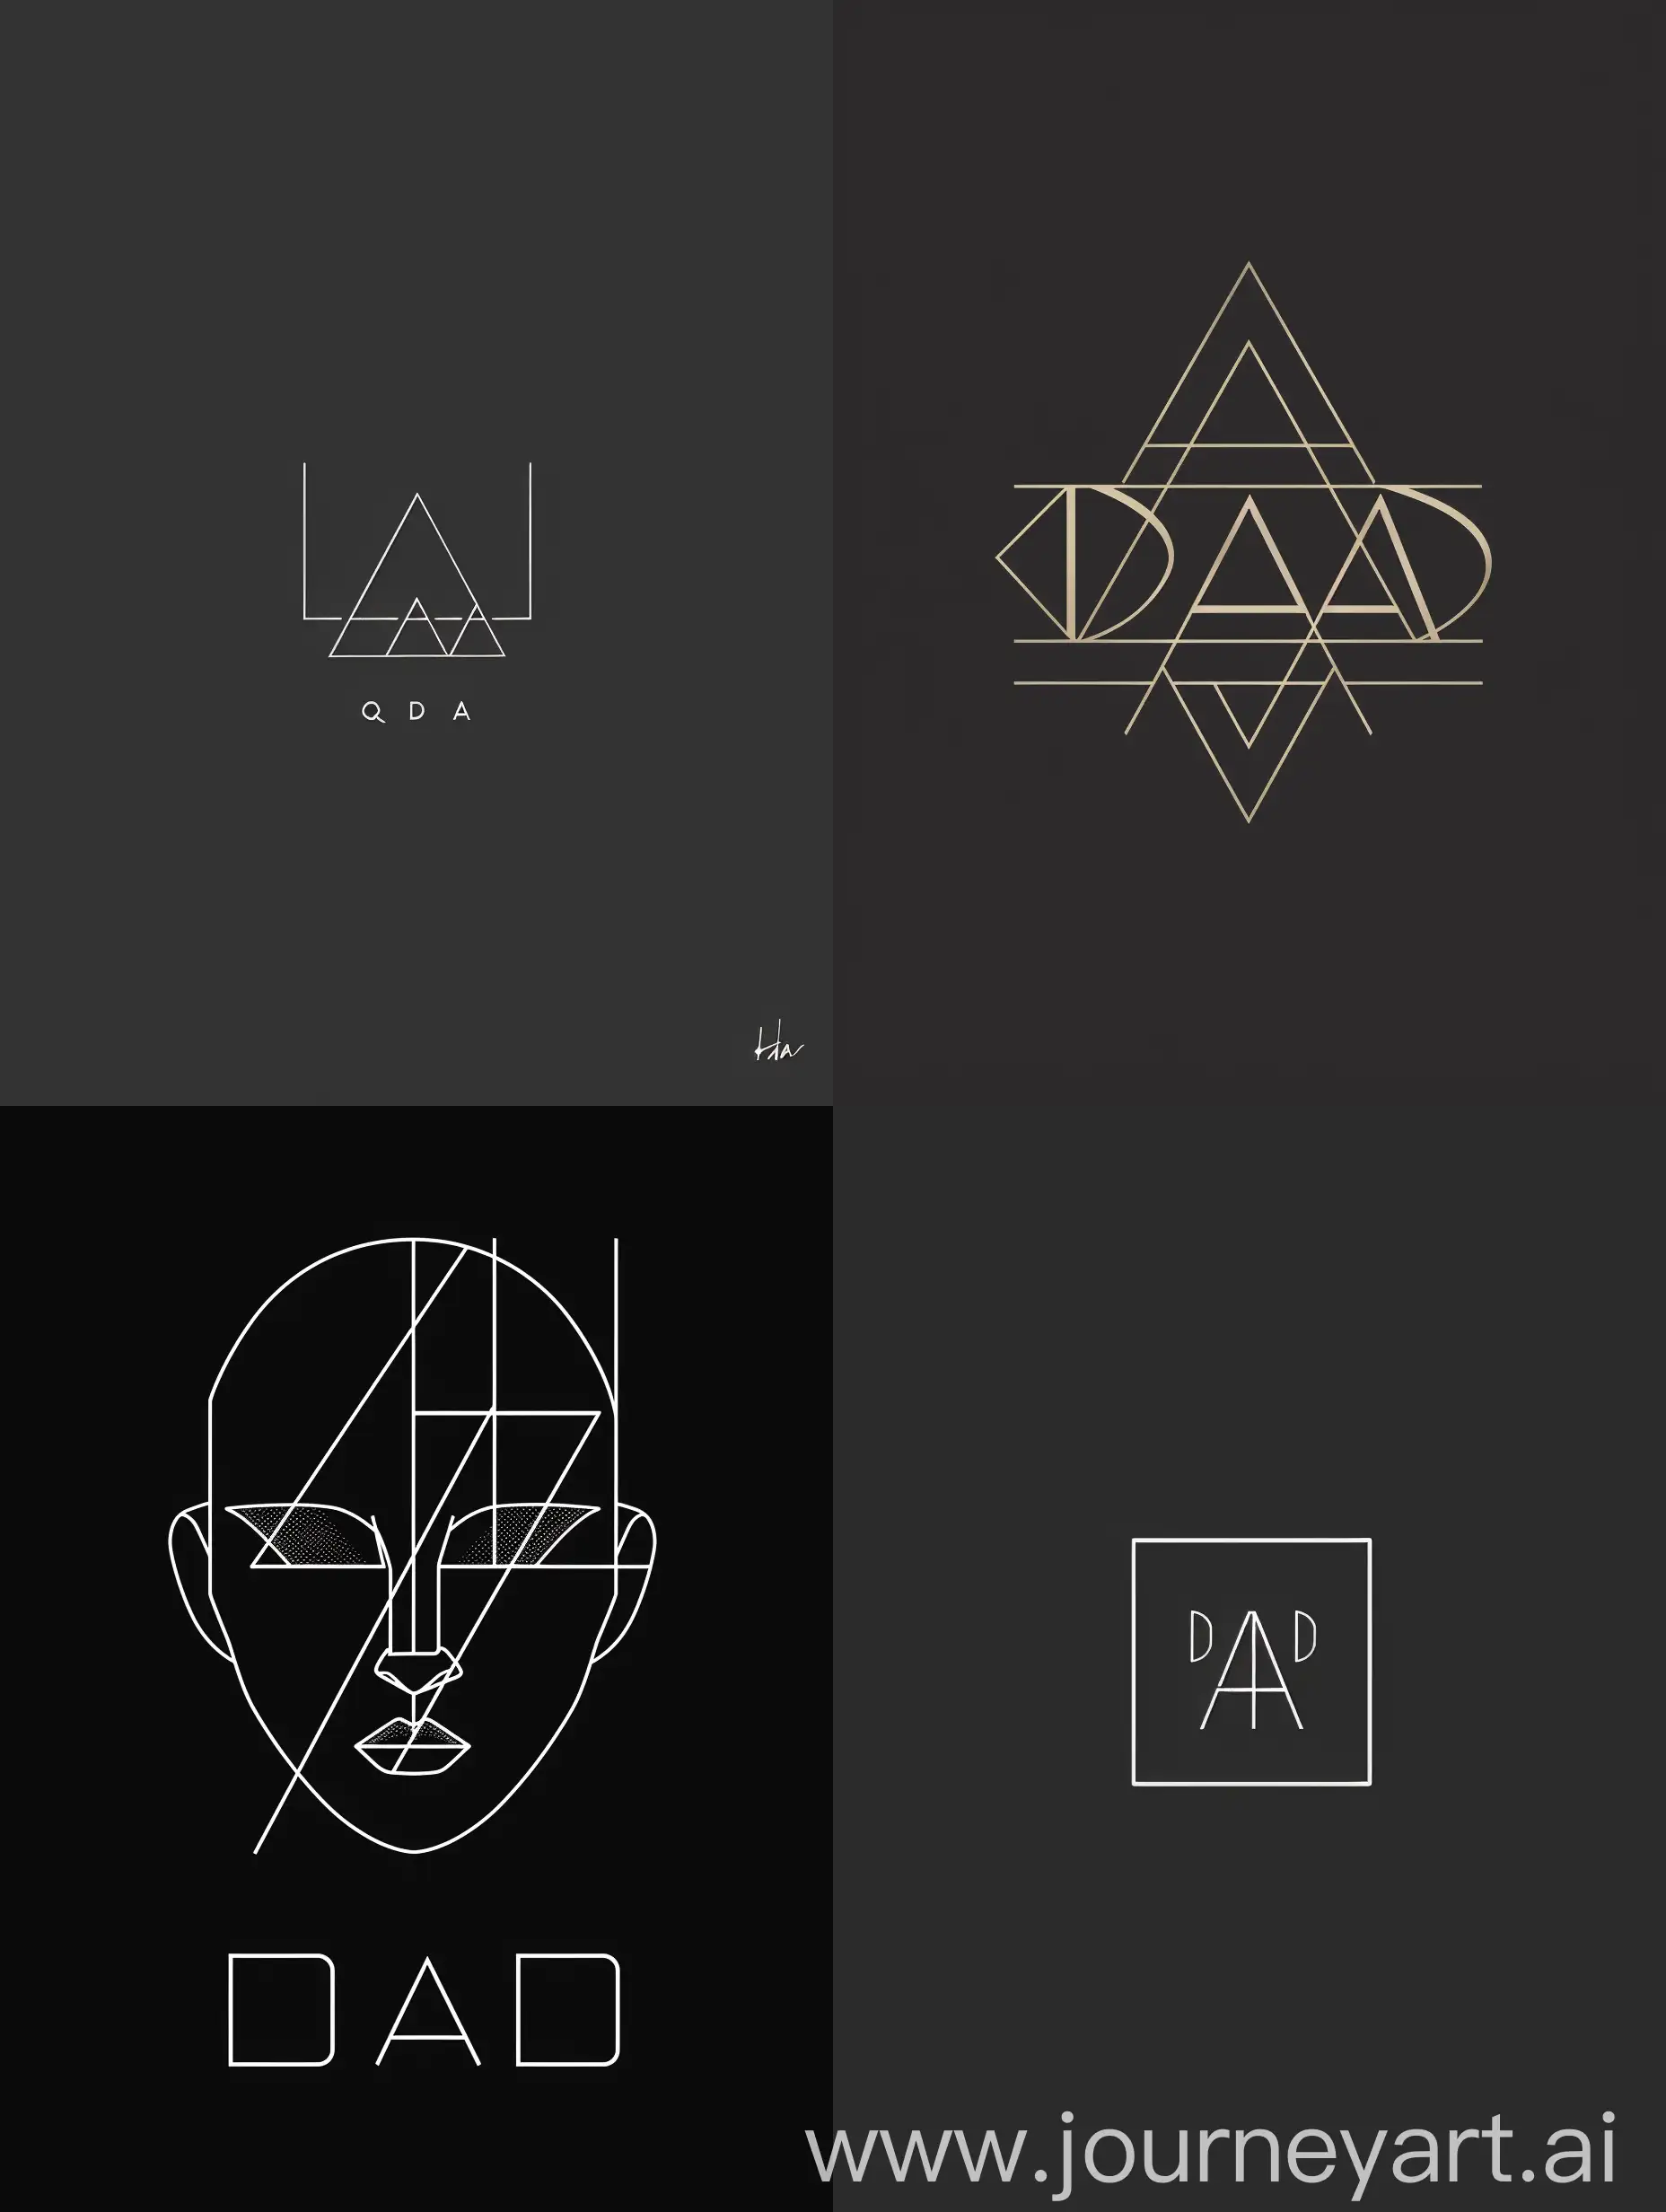 Craft a minimalist and geometric logo for a modern clothing brand named 'ADA'.